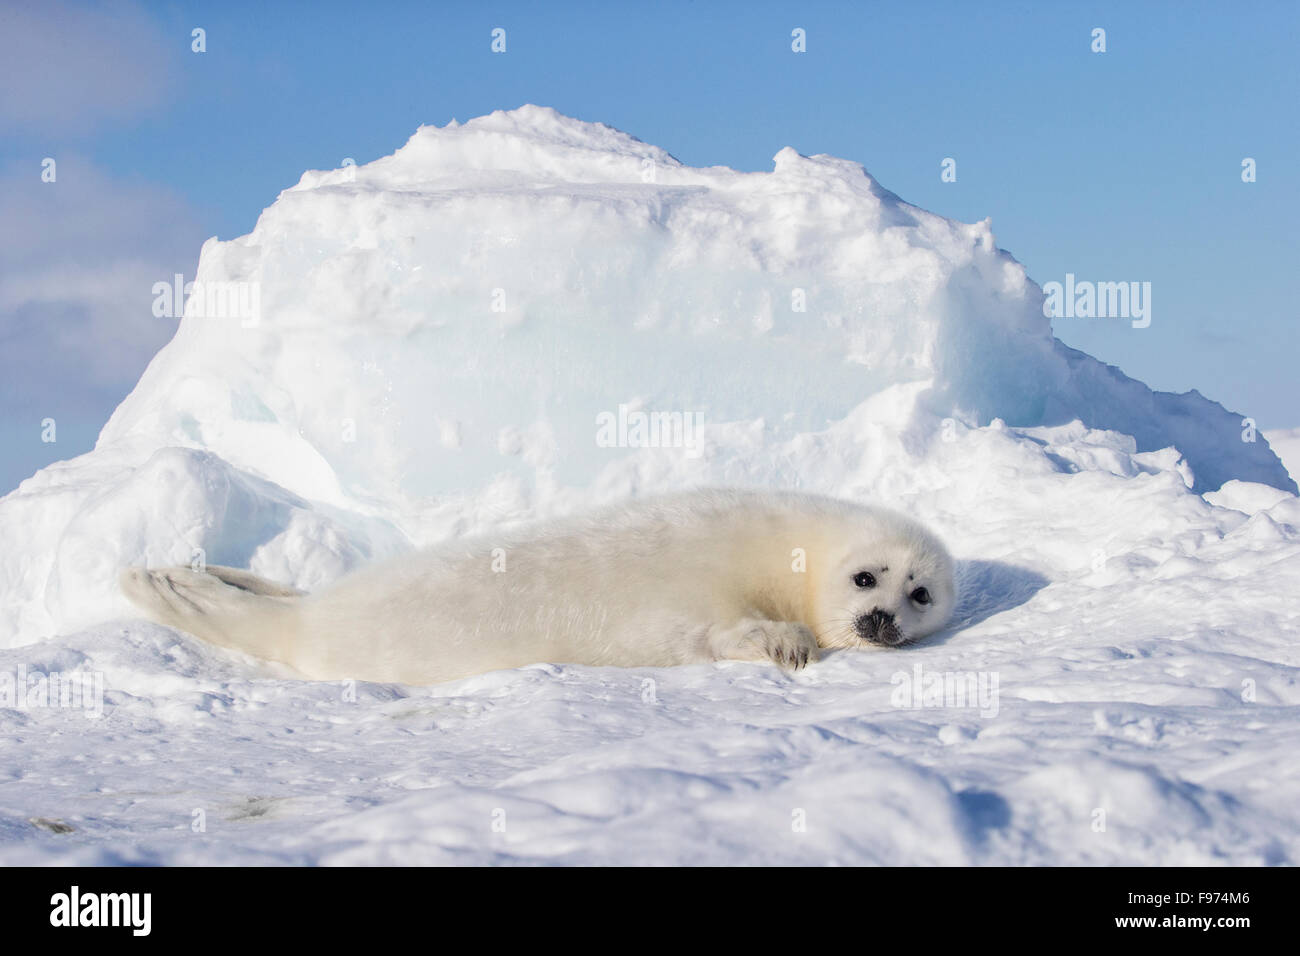 Harp seal (Pagophilus groenlandicus), whitecoat pup, on sea ice, Gulf of St. Lawrence, near Îles de la Madeleine (Magdalen Stock Photo